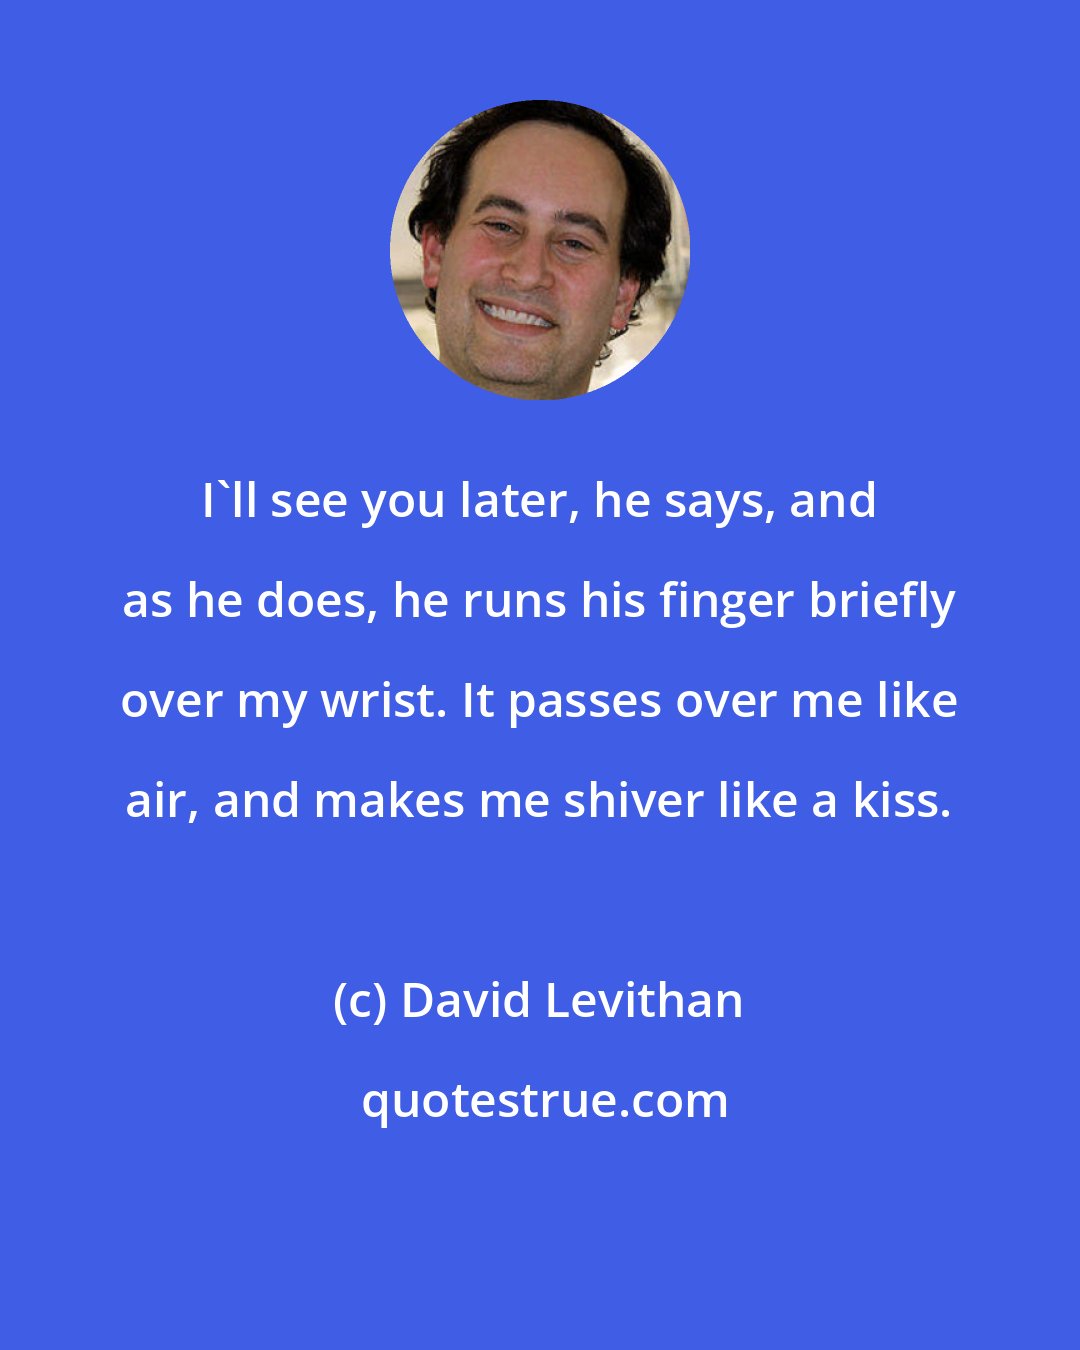 David Levithan: I'll see you later, he says, and as he does, he runs his finger briefly over my wrist. It passes over me like air, and makes me shiver like a kiss.